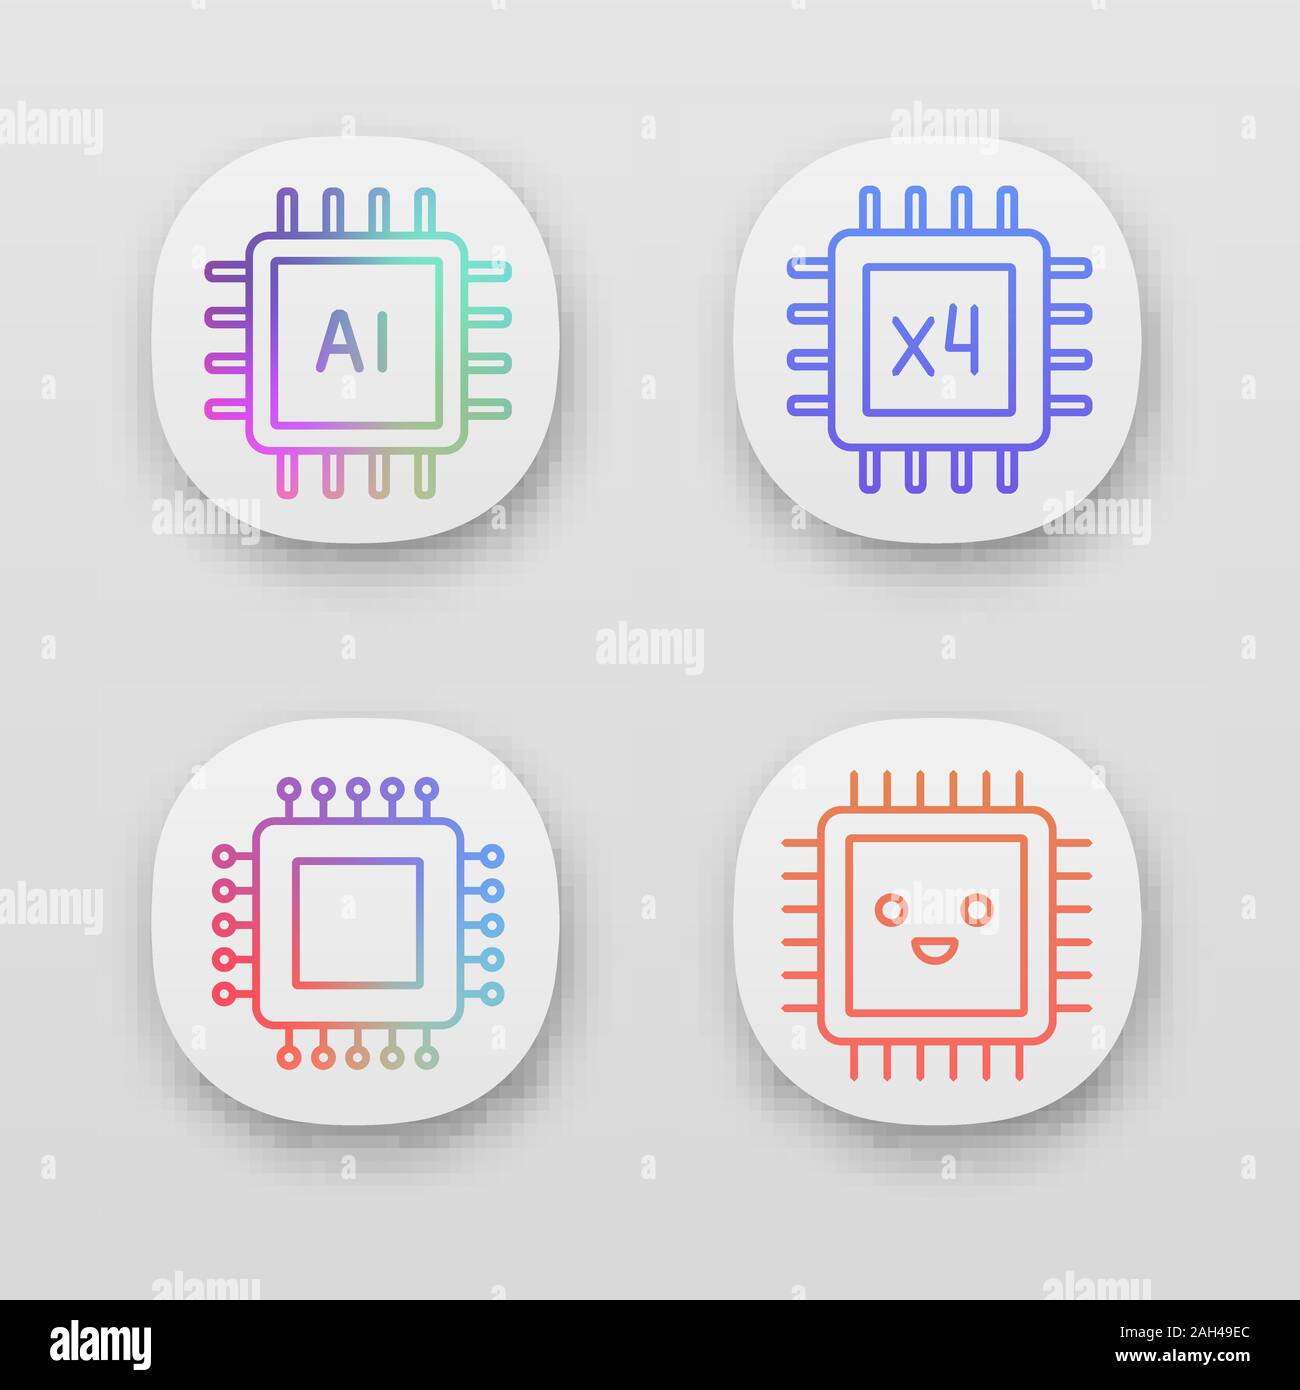 Processors app icons set. UI/UX user interface. Chip, integrated circuit for ai system, smiling microprocessor, quad core processor. Web or mobile app Stock Vector